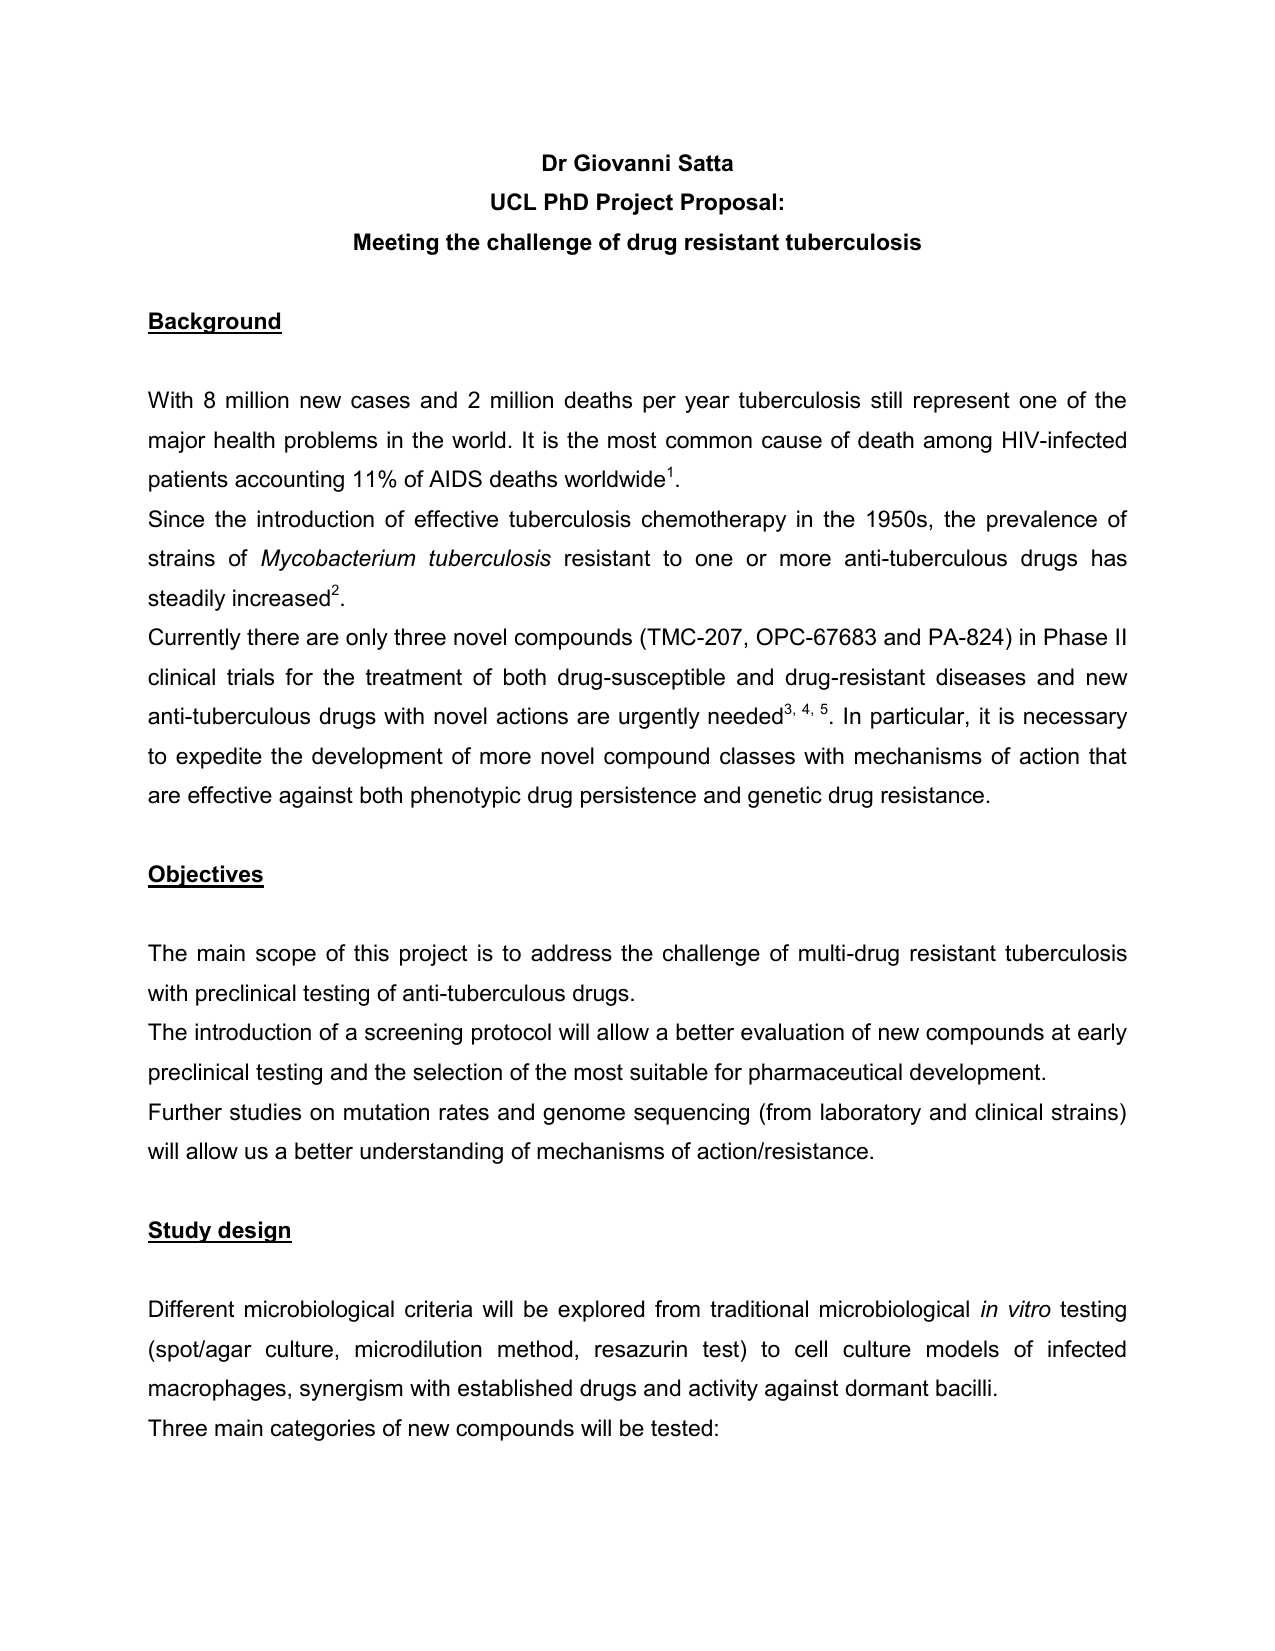 ucl phd research proposal